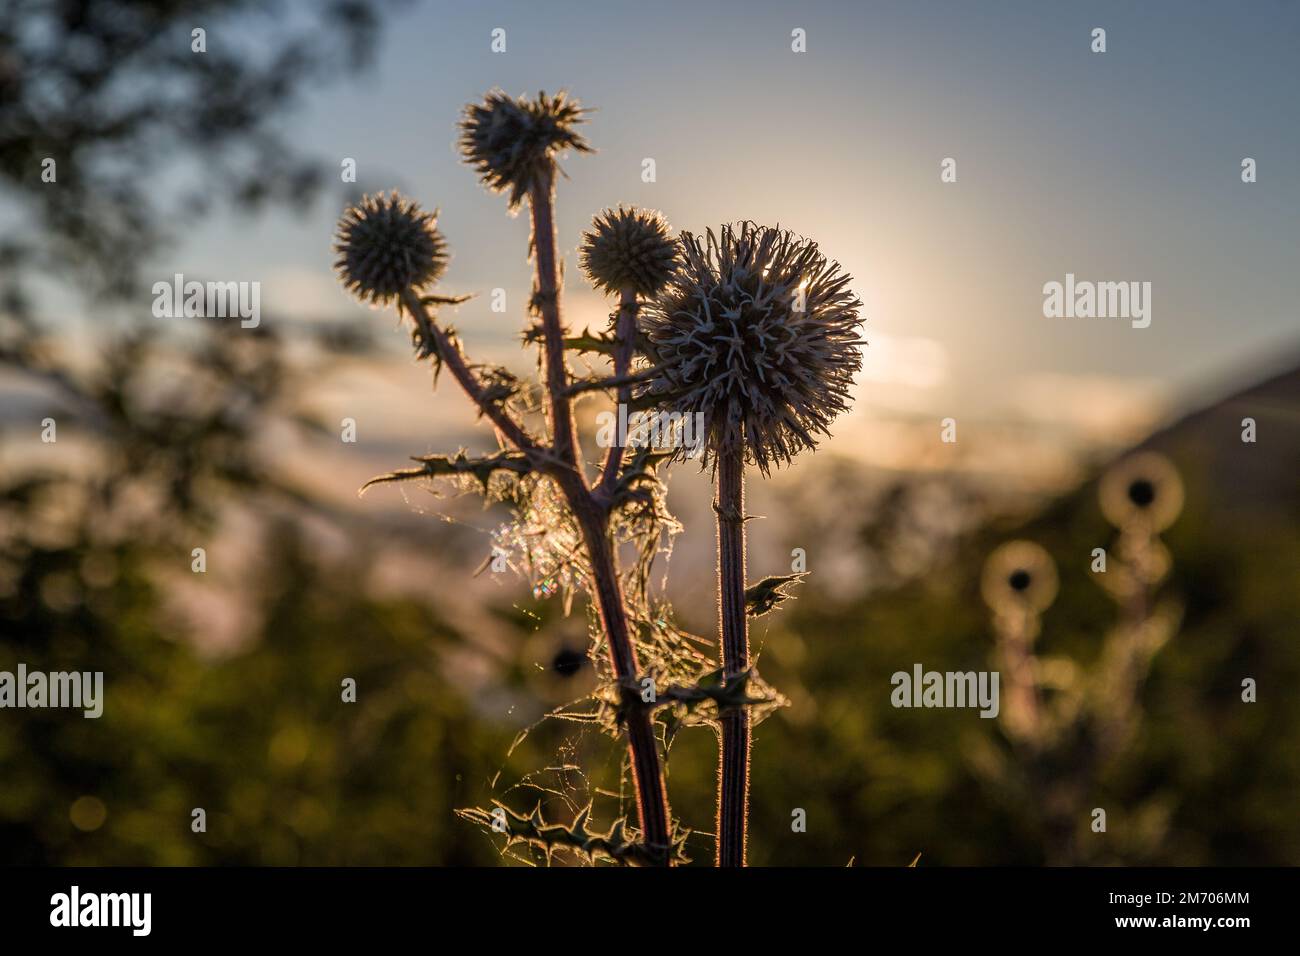 A spiked weed plant silhouette at sunset Stock Photo